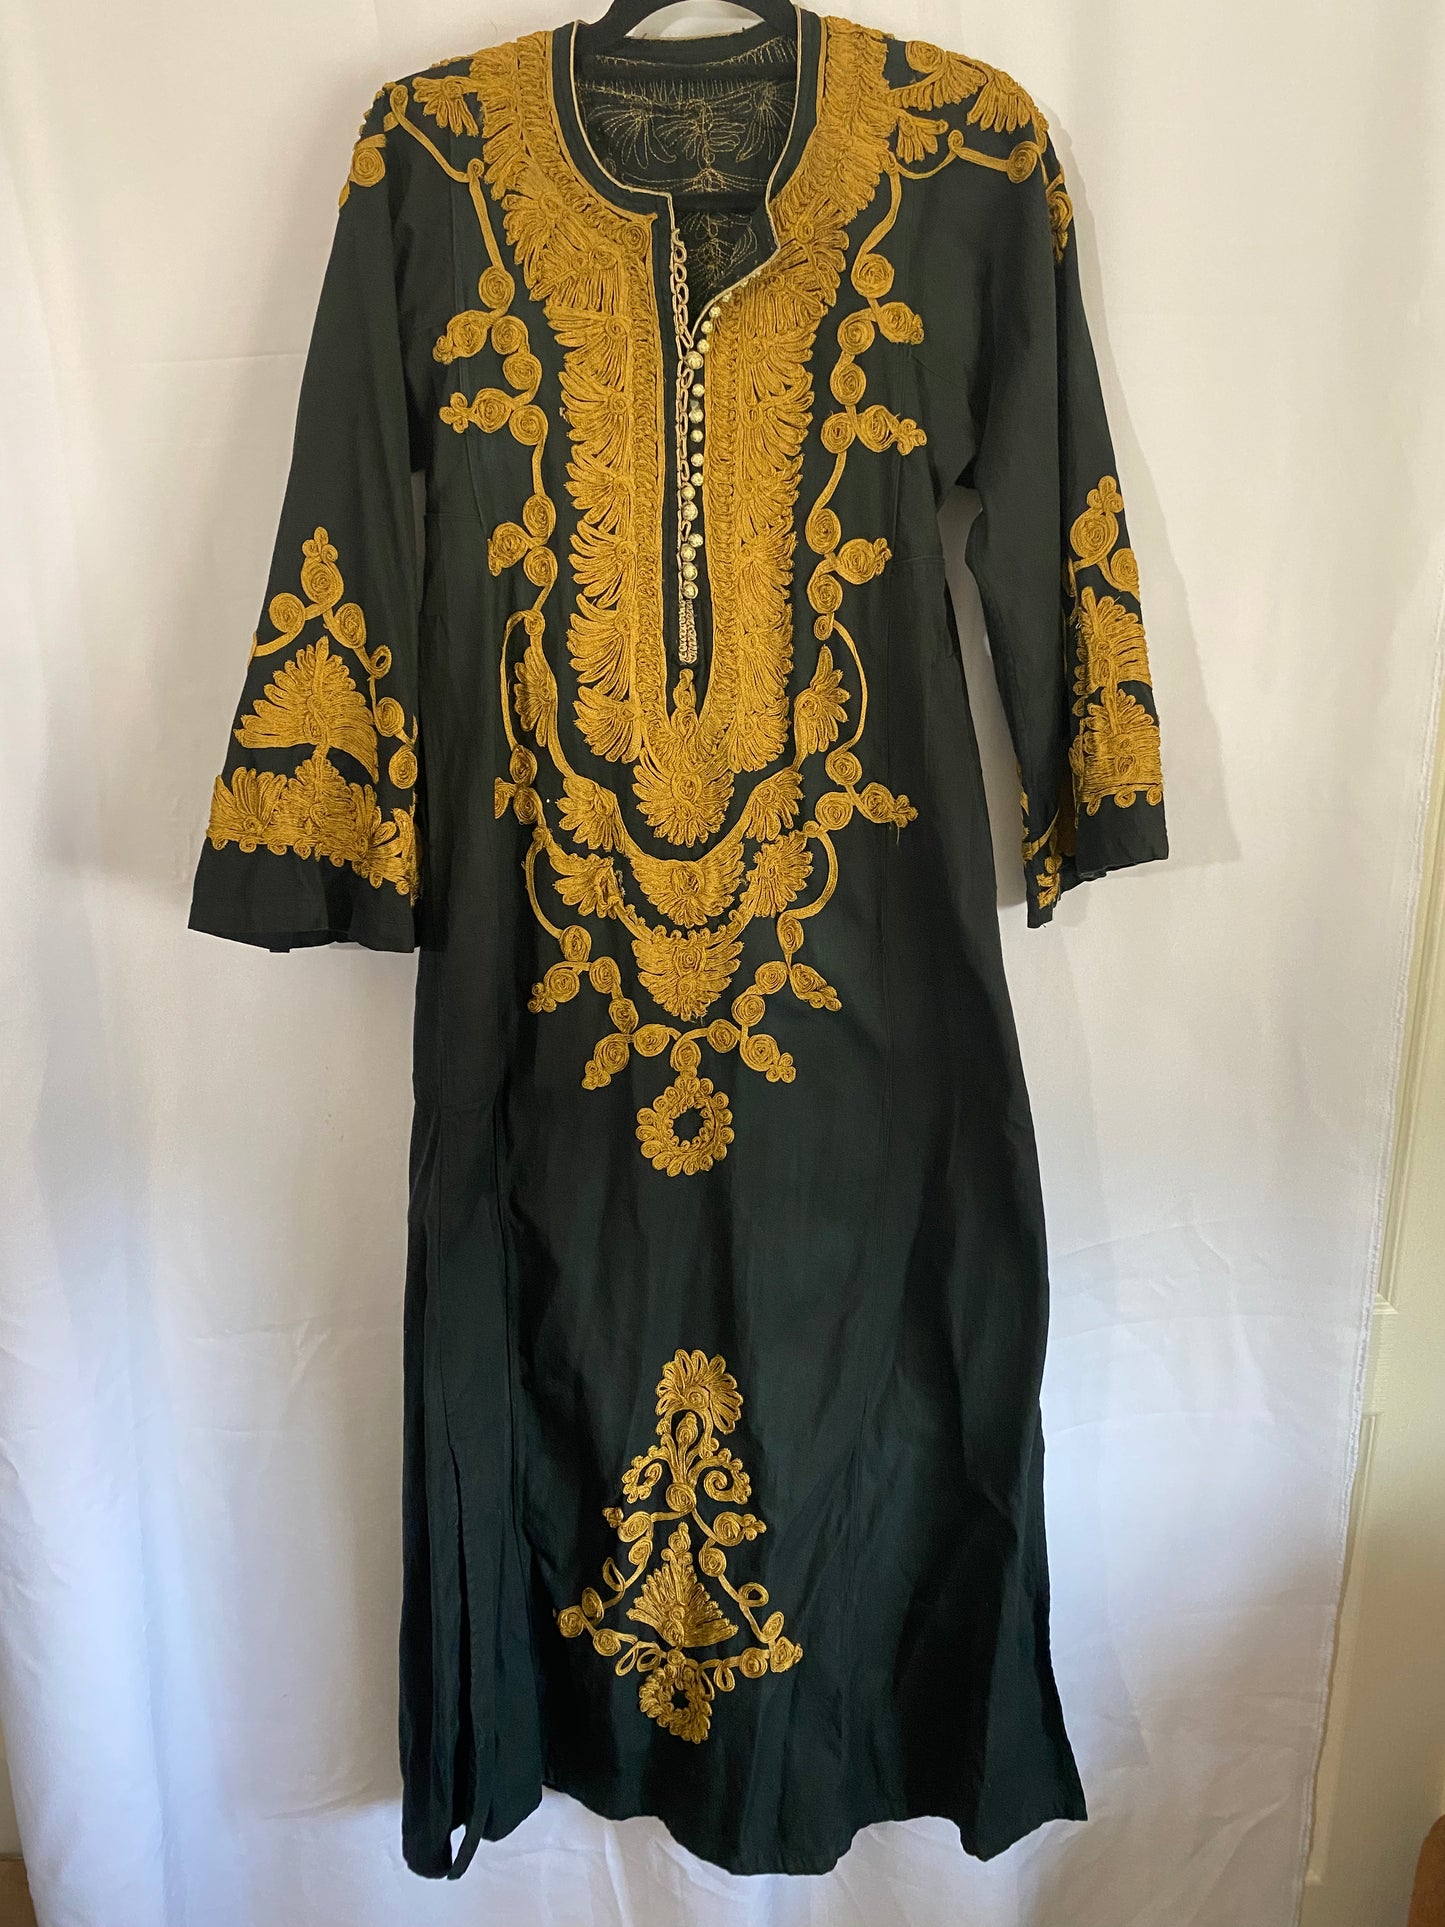 Black Traditional Garment with Brown Scrolling Design